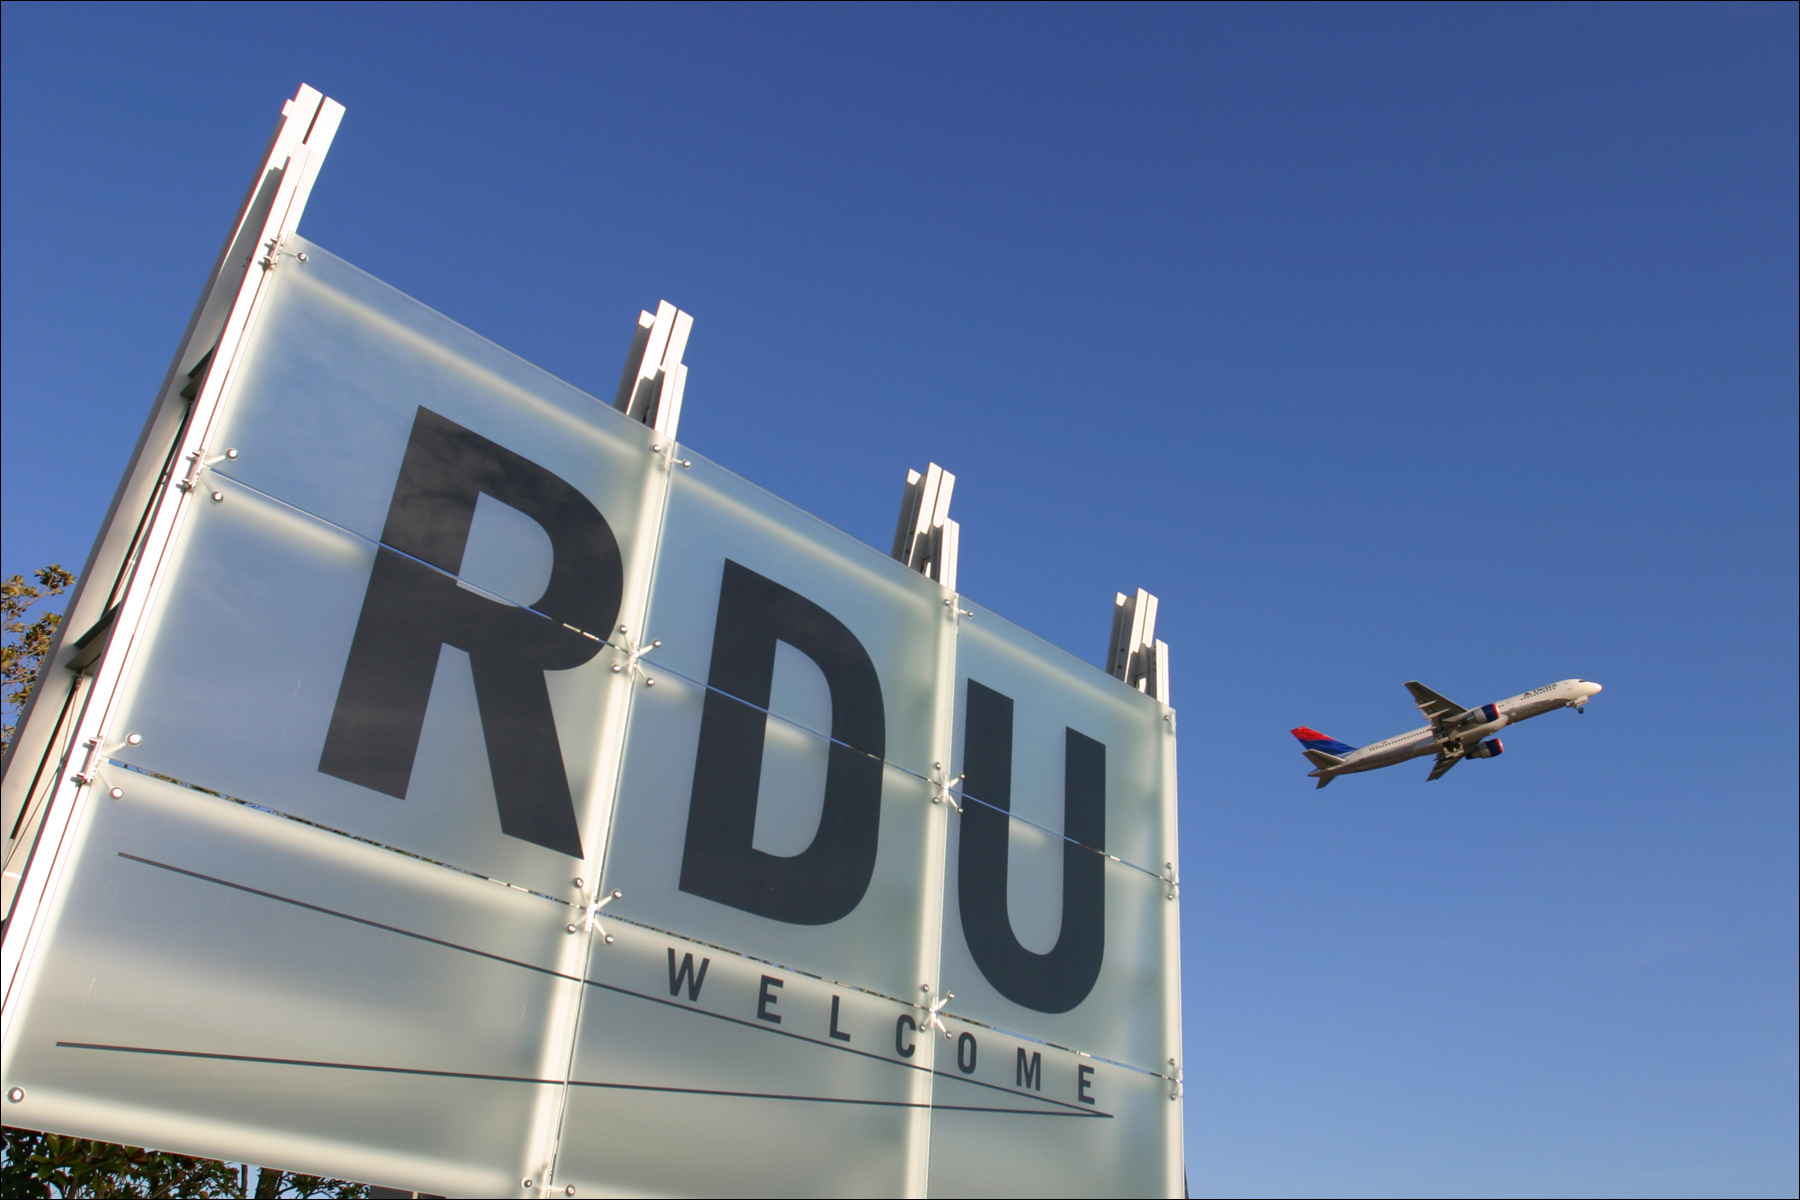 RDU Welcome sign with plane in the background